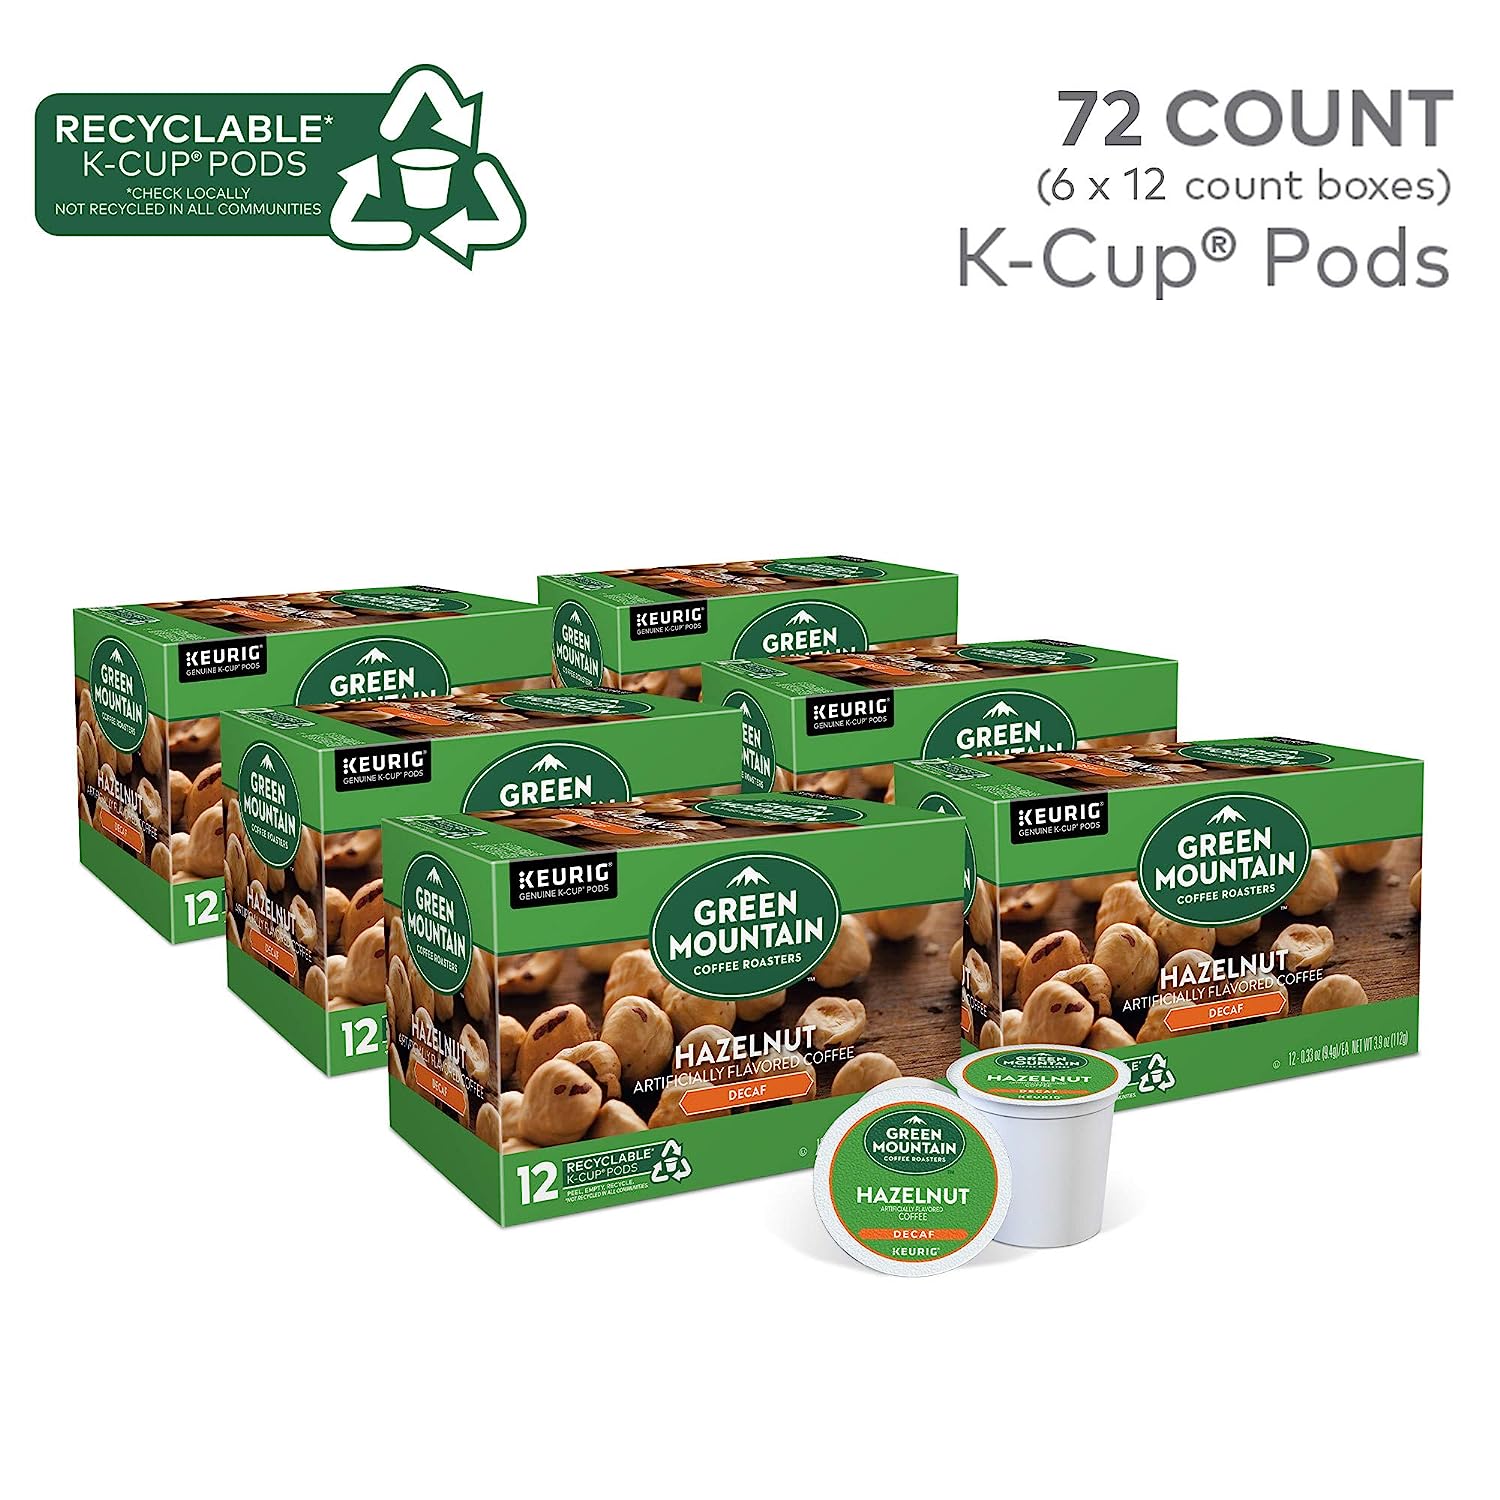 Green Mountain Coffee Roasters Hazelnut, Single Serve Coffee K-Cup Pod,  Decaf, 12 Count (Pack of 6) (Packaging May Vary), 72 Count